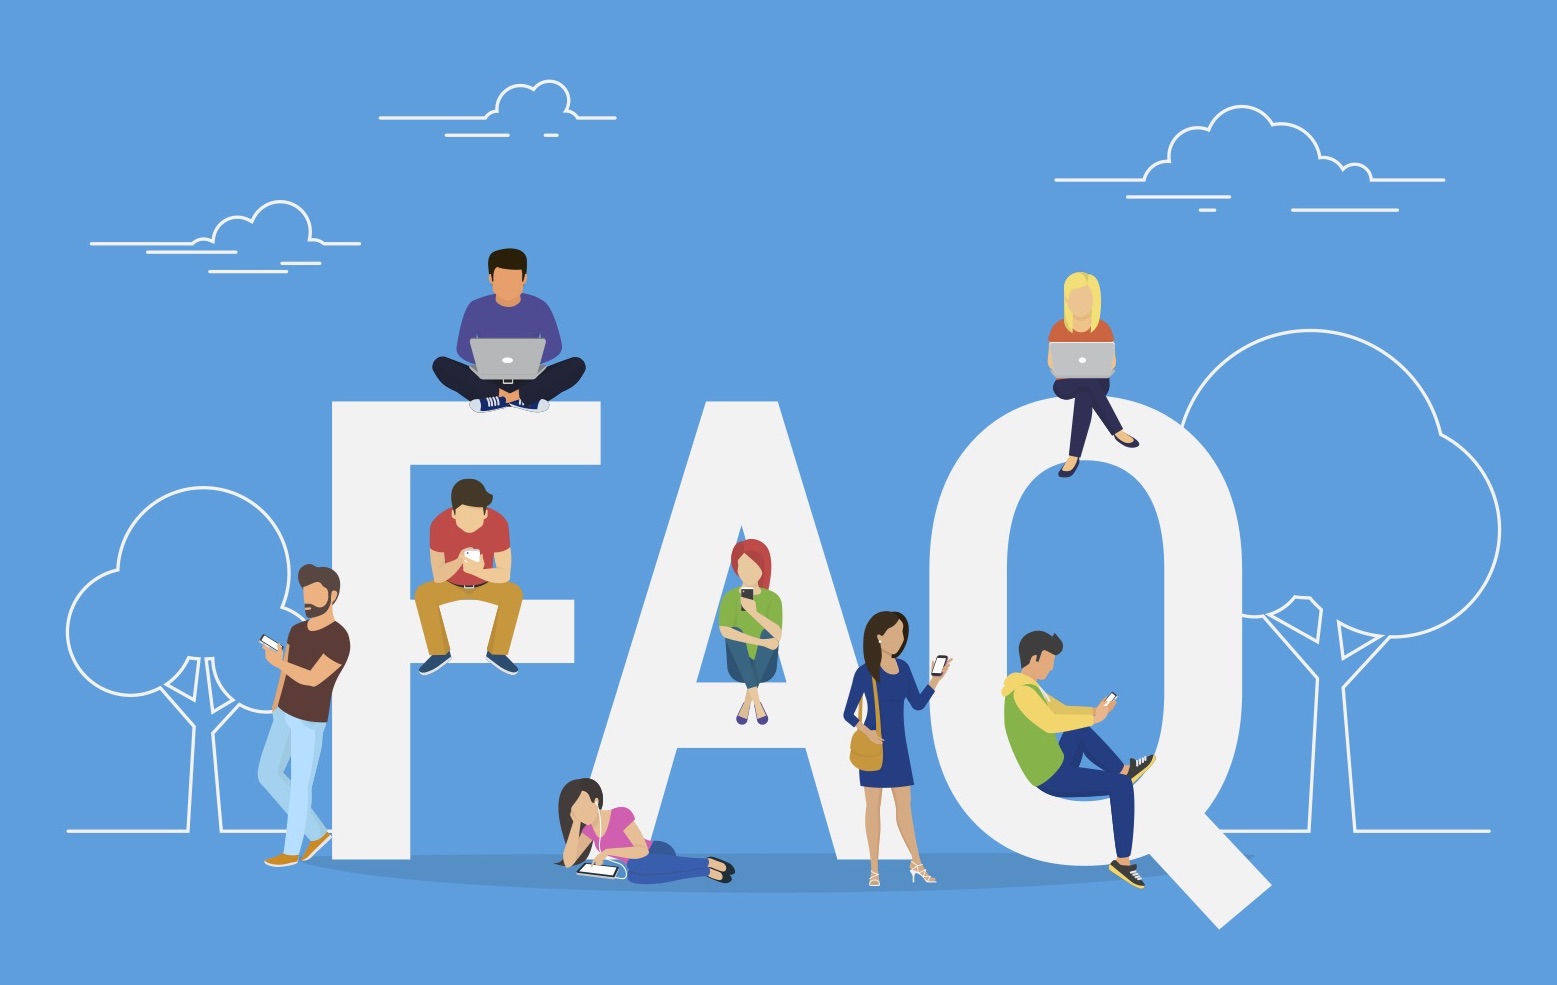 cartoon people sitting on FAQ sign with blue background 